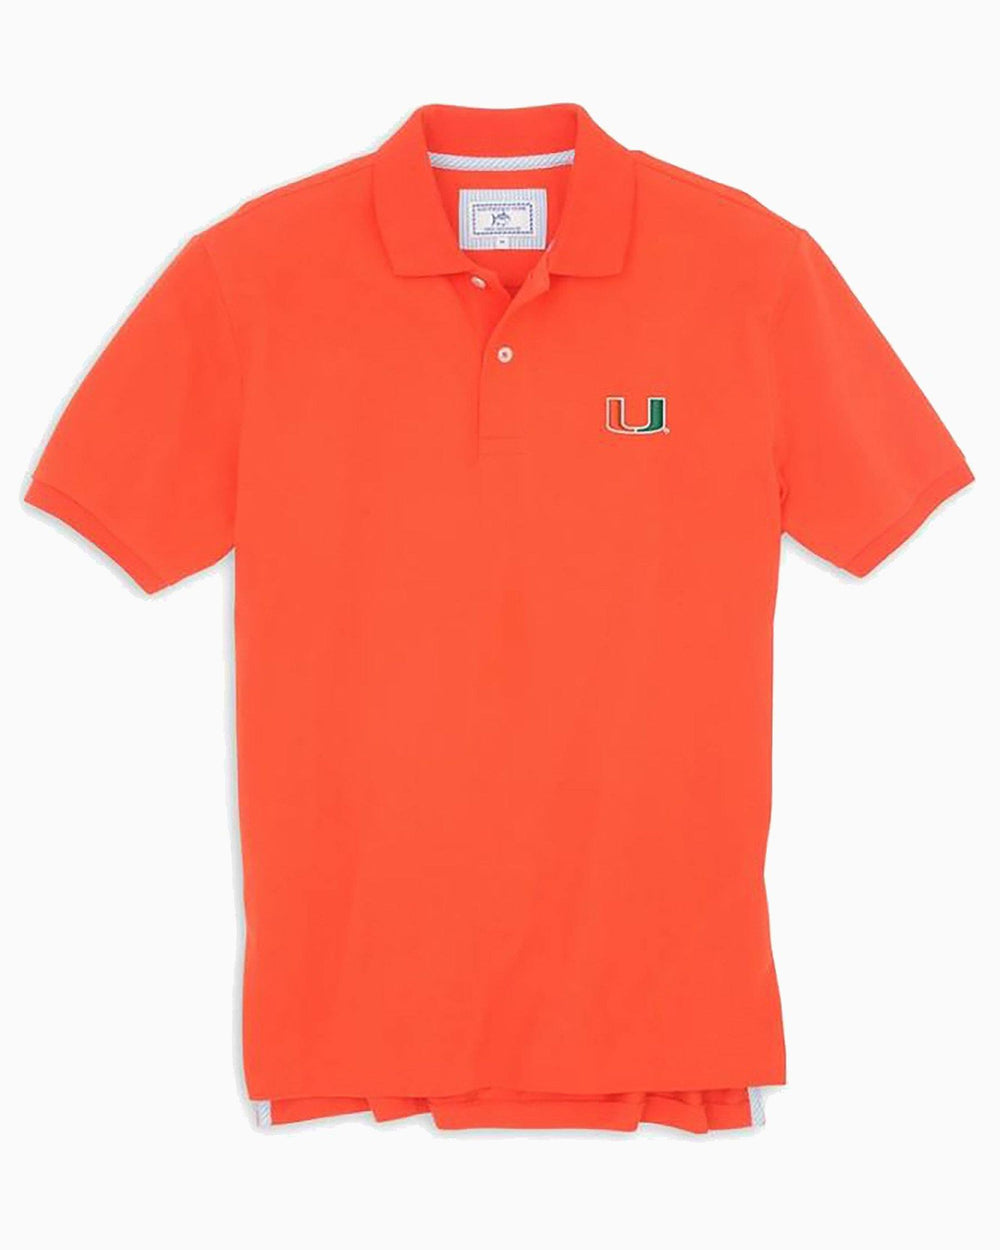 The front view of the Men's Orange Miami Hurricanes Pique Polo Shirt by Southern Tide - Endzone Orange